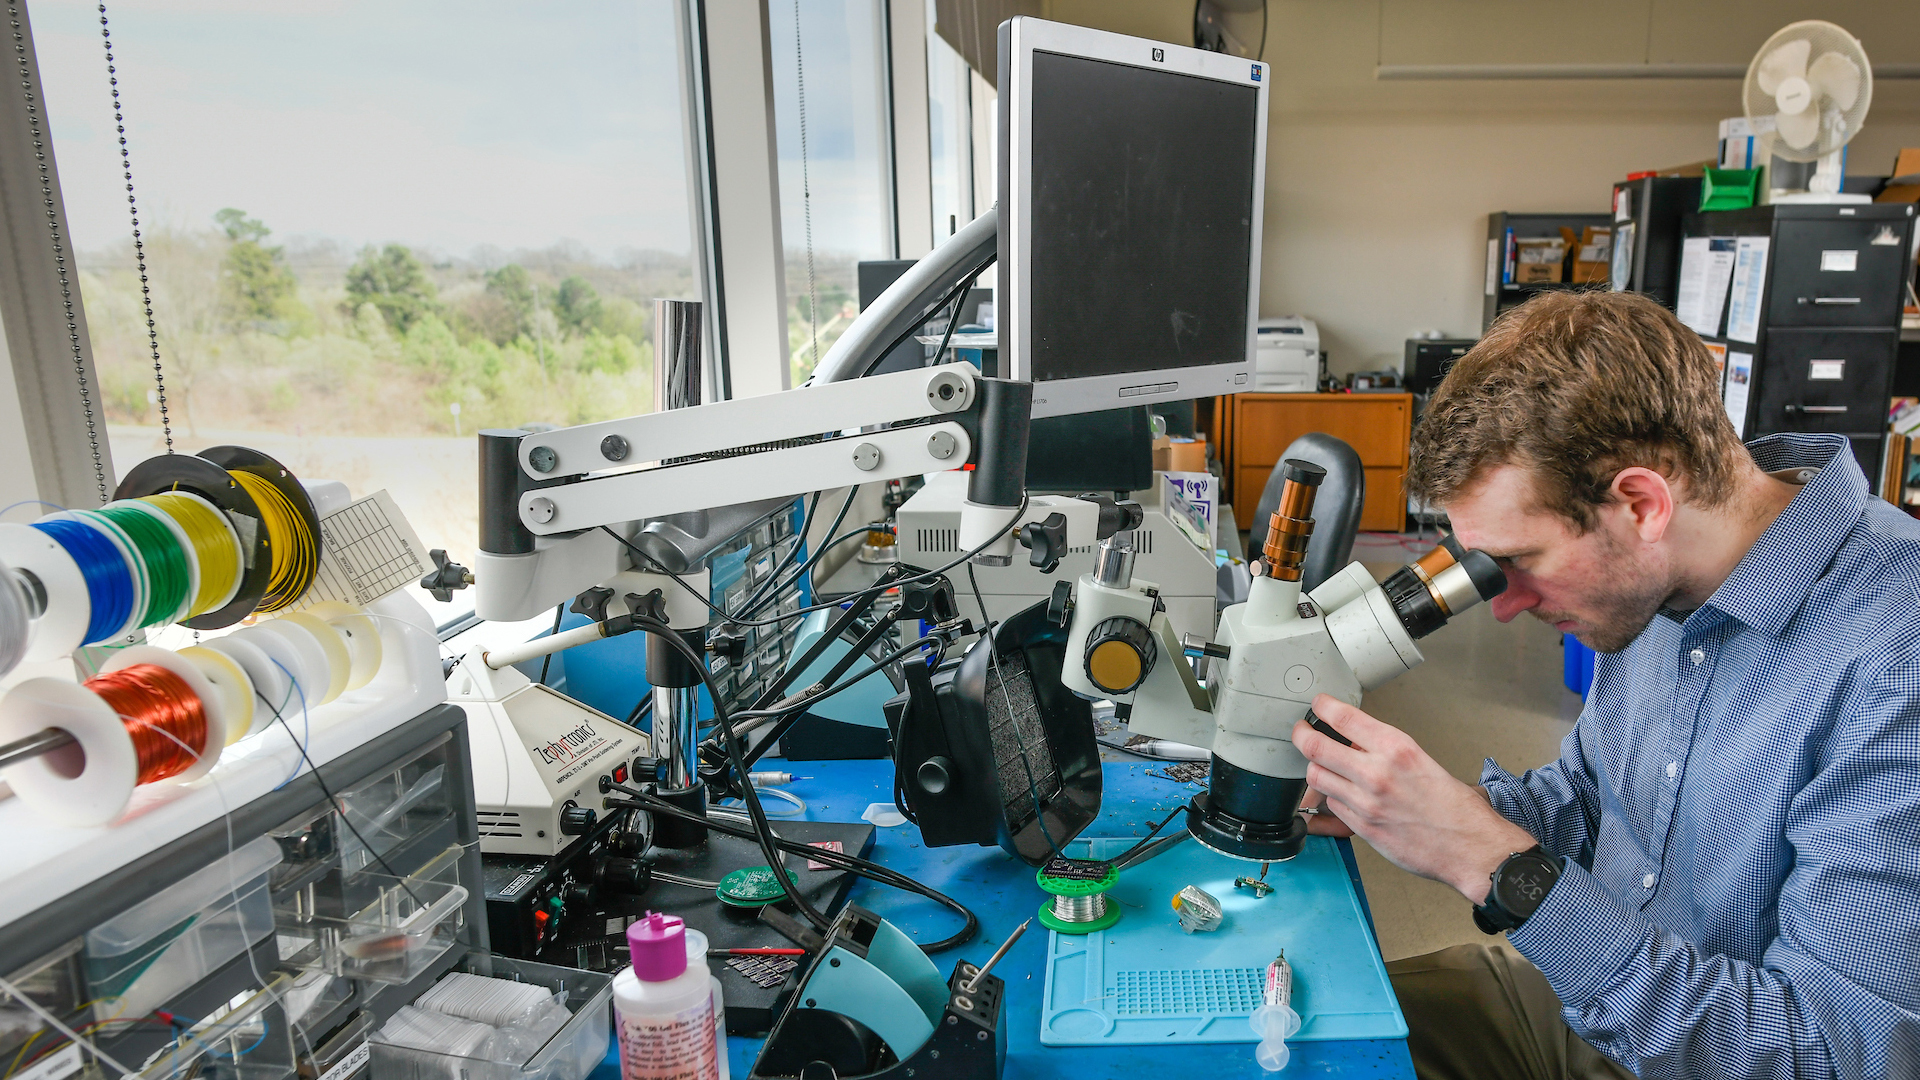 A researcher examines material under a microscope in a lab on NC State's Centennial Campus.